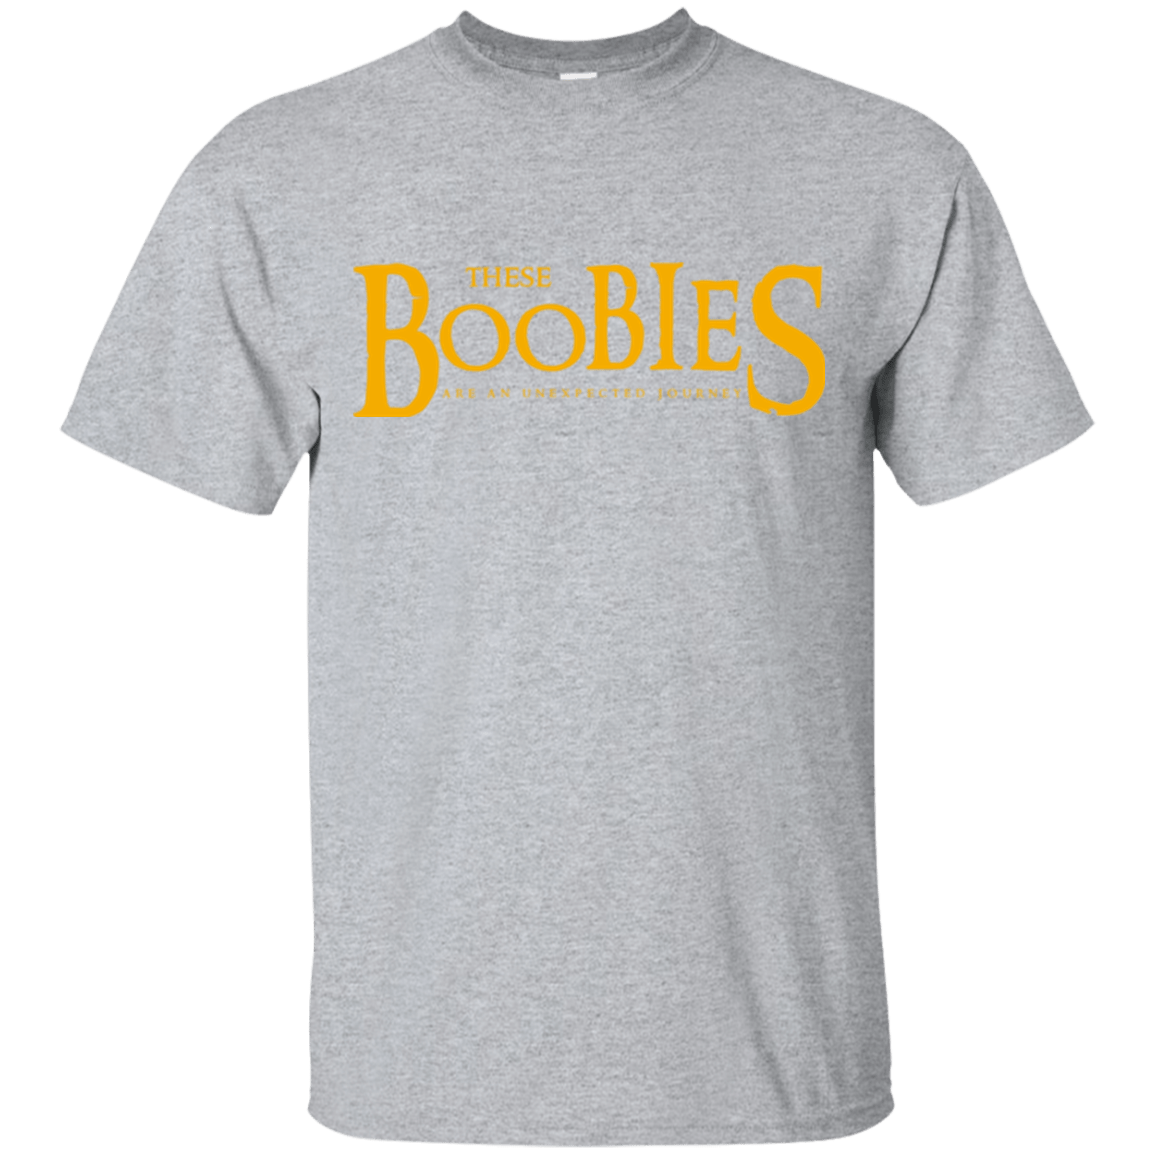 T-Shirts Sport Grey / Small These boobies T-Shirt